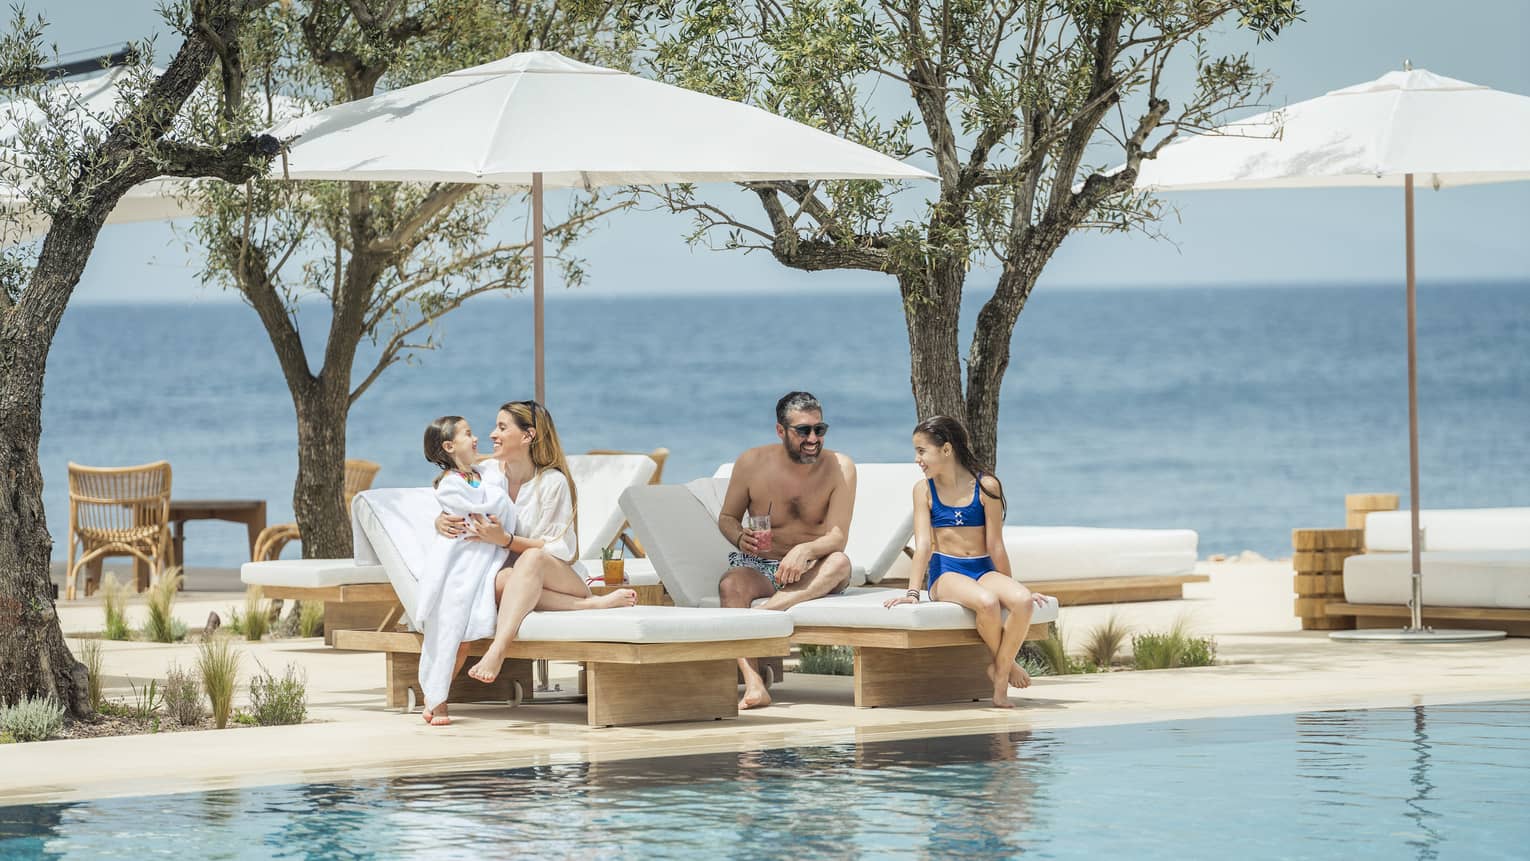 A family of four mingles on two white lounge chairs next to a pool, white umbrellas, sea in the distance